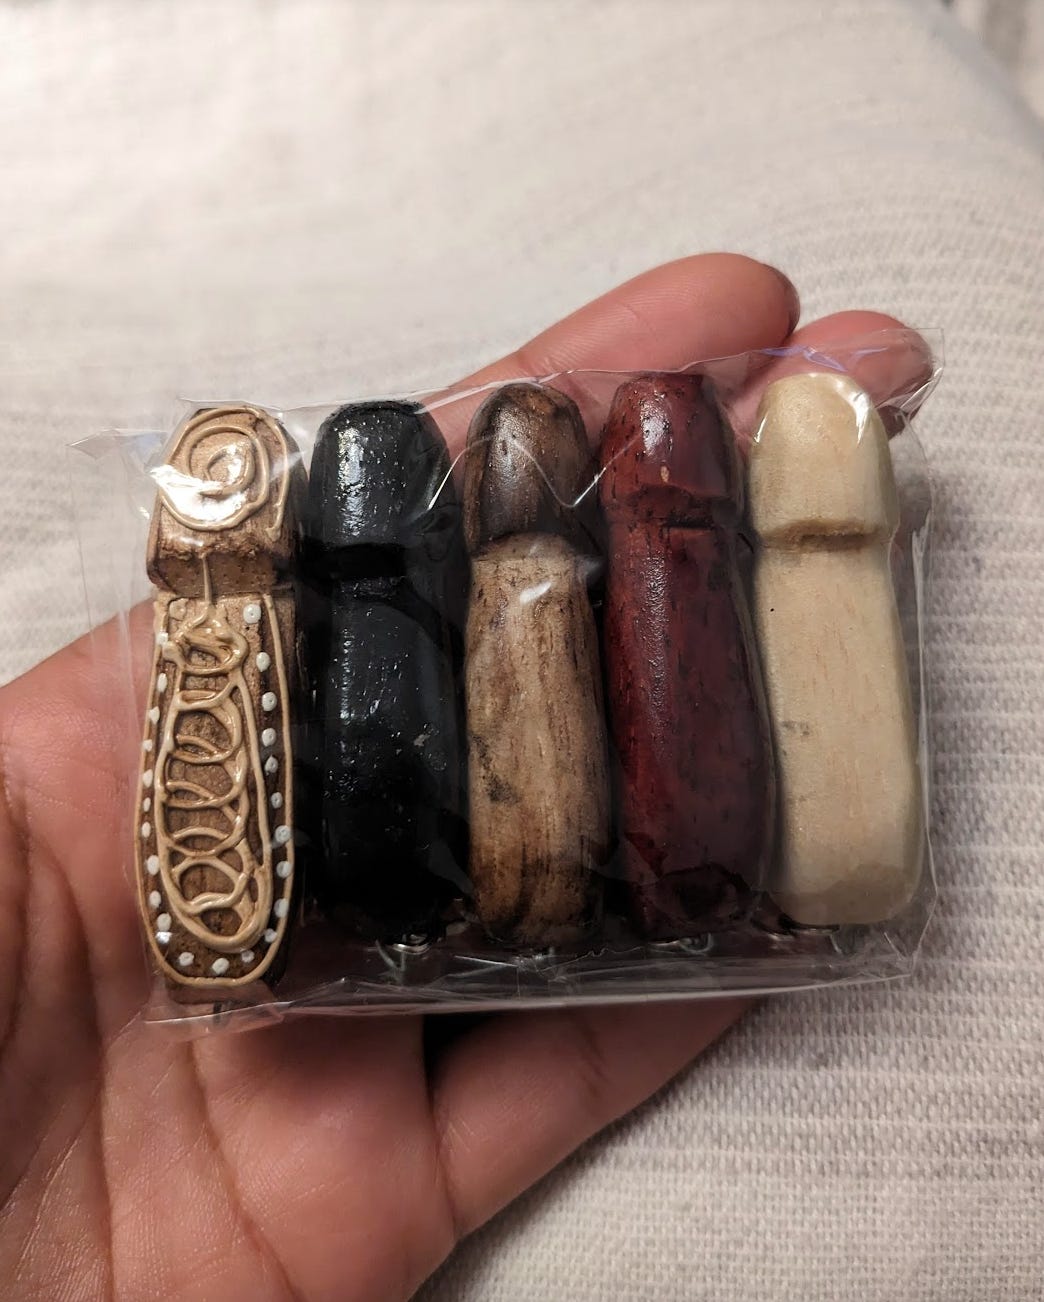 A hand holds 3 penis shaped key chains that are in a range of colors from red to brown to black